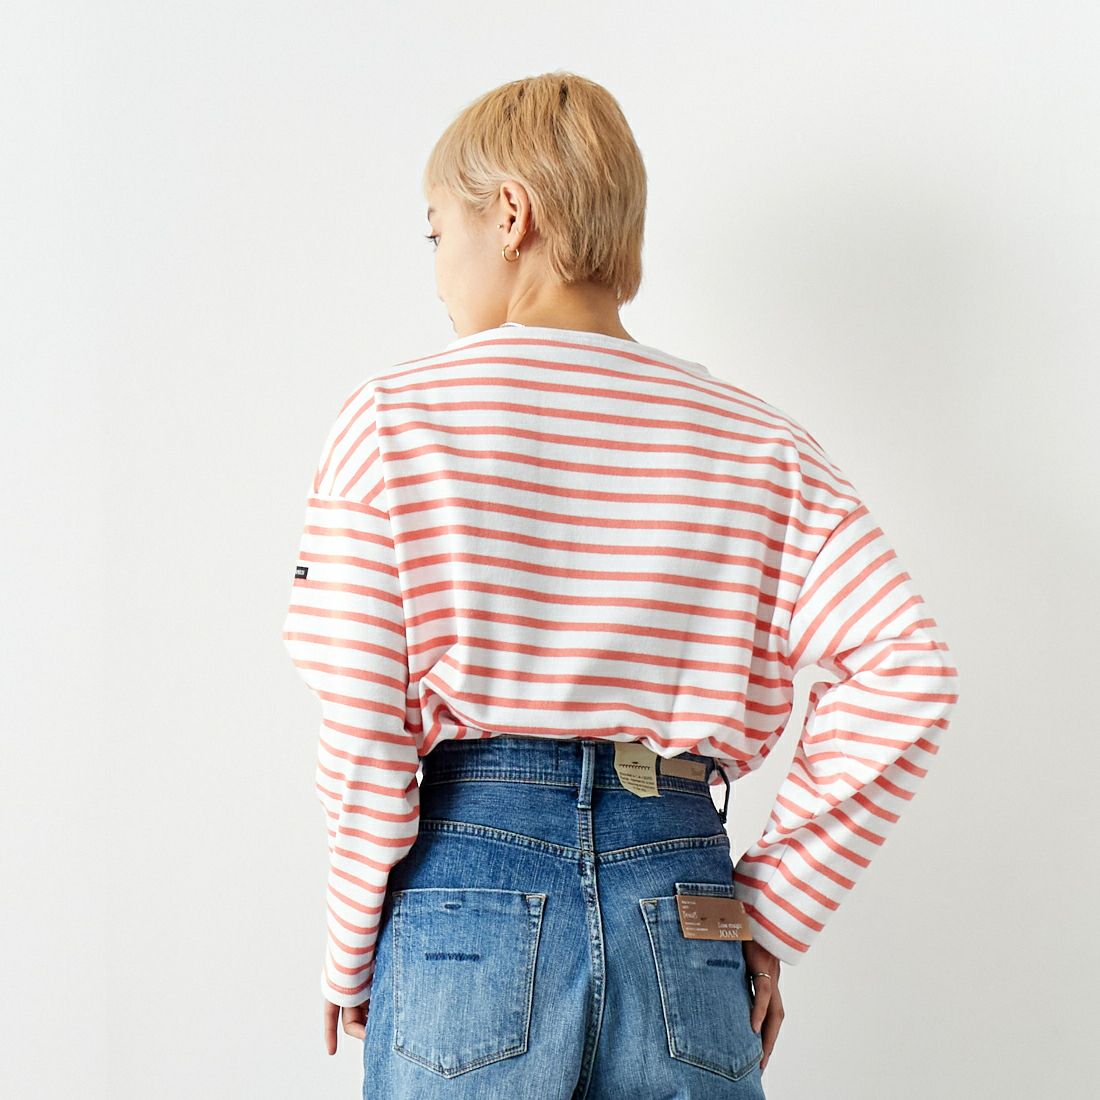 ST.JAMES [セントジェームス] 厚手ルーズドロップTシャツ [20JC-OUESS-LOOSE] NEI/FRE &&モデル身長：160cm 着用サイズ：3&&